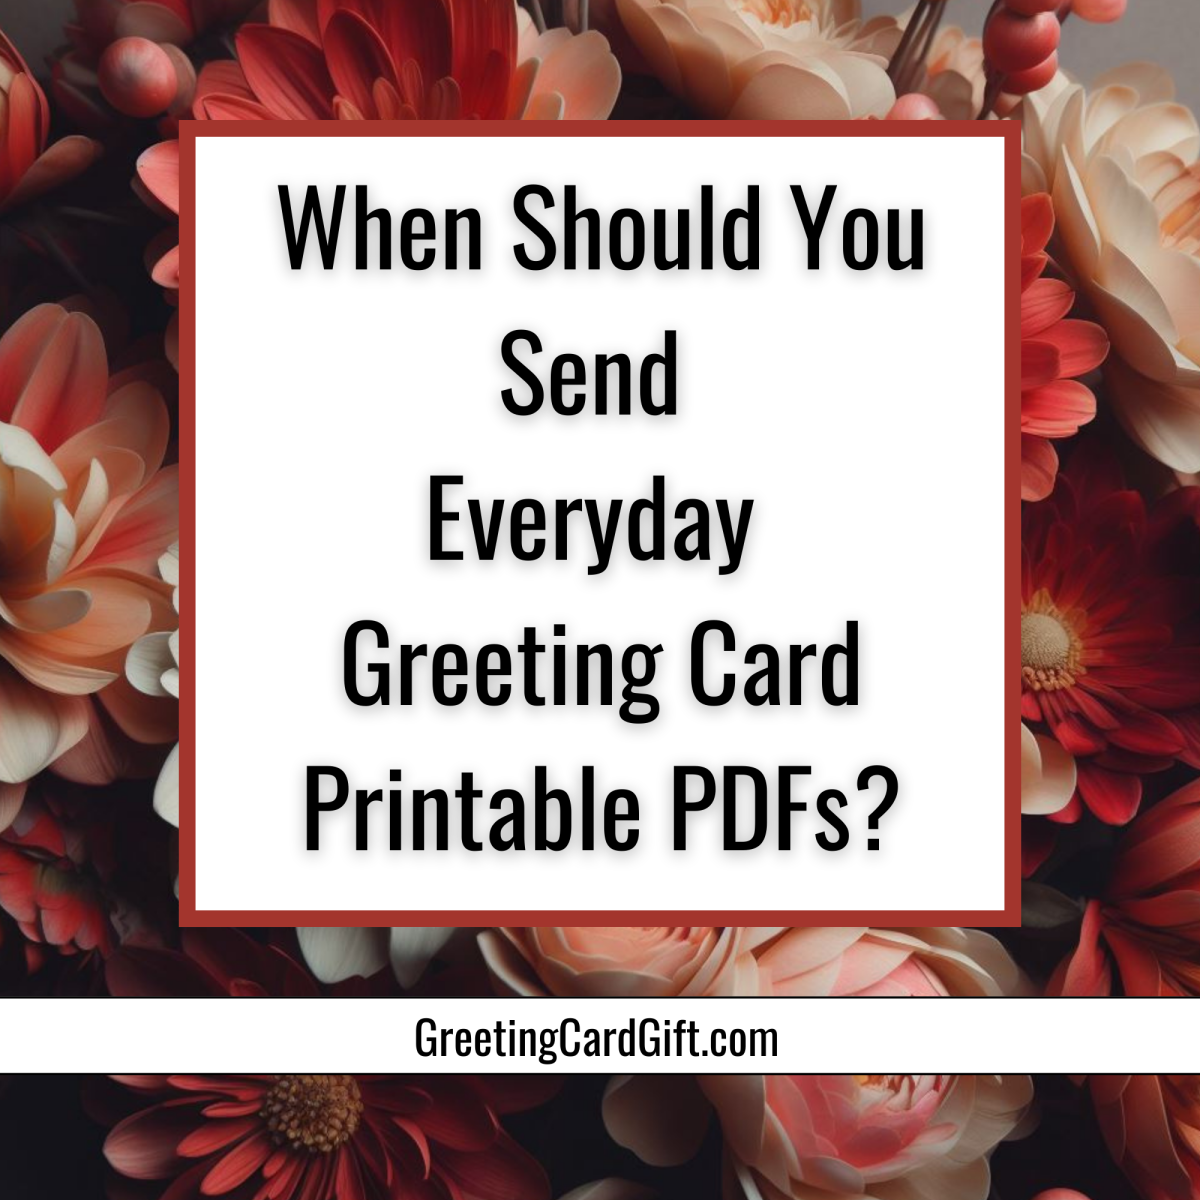 When Should You Send Everyday Greeting Card Printable PDFs?